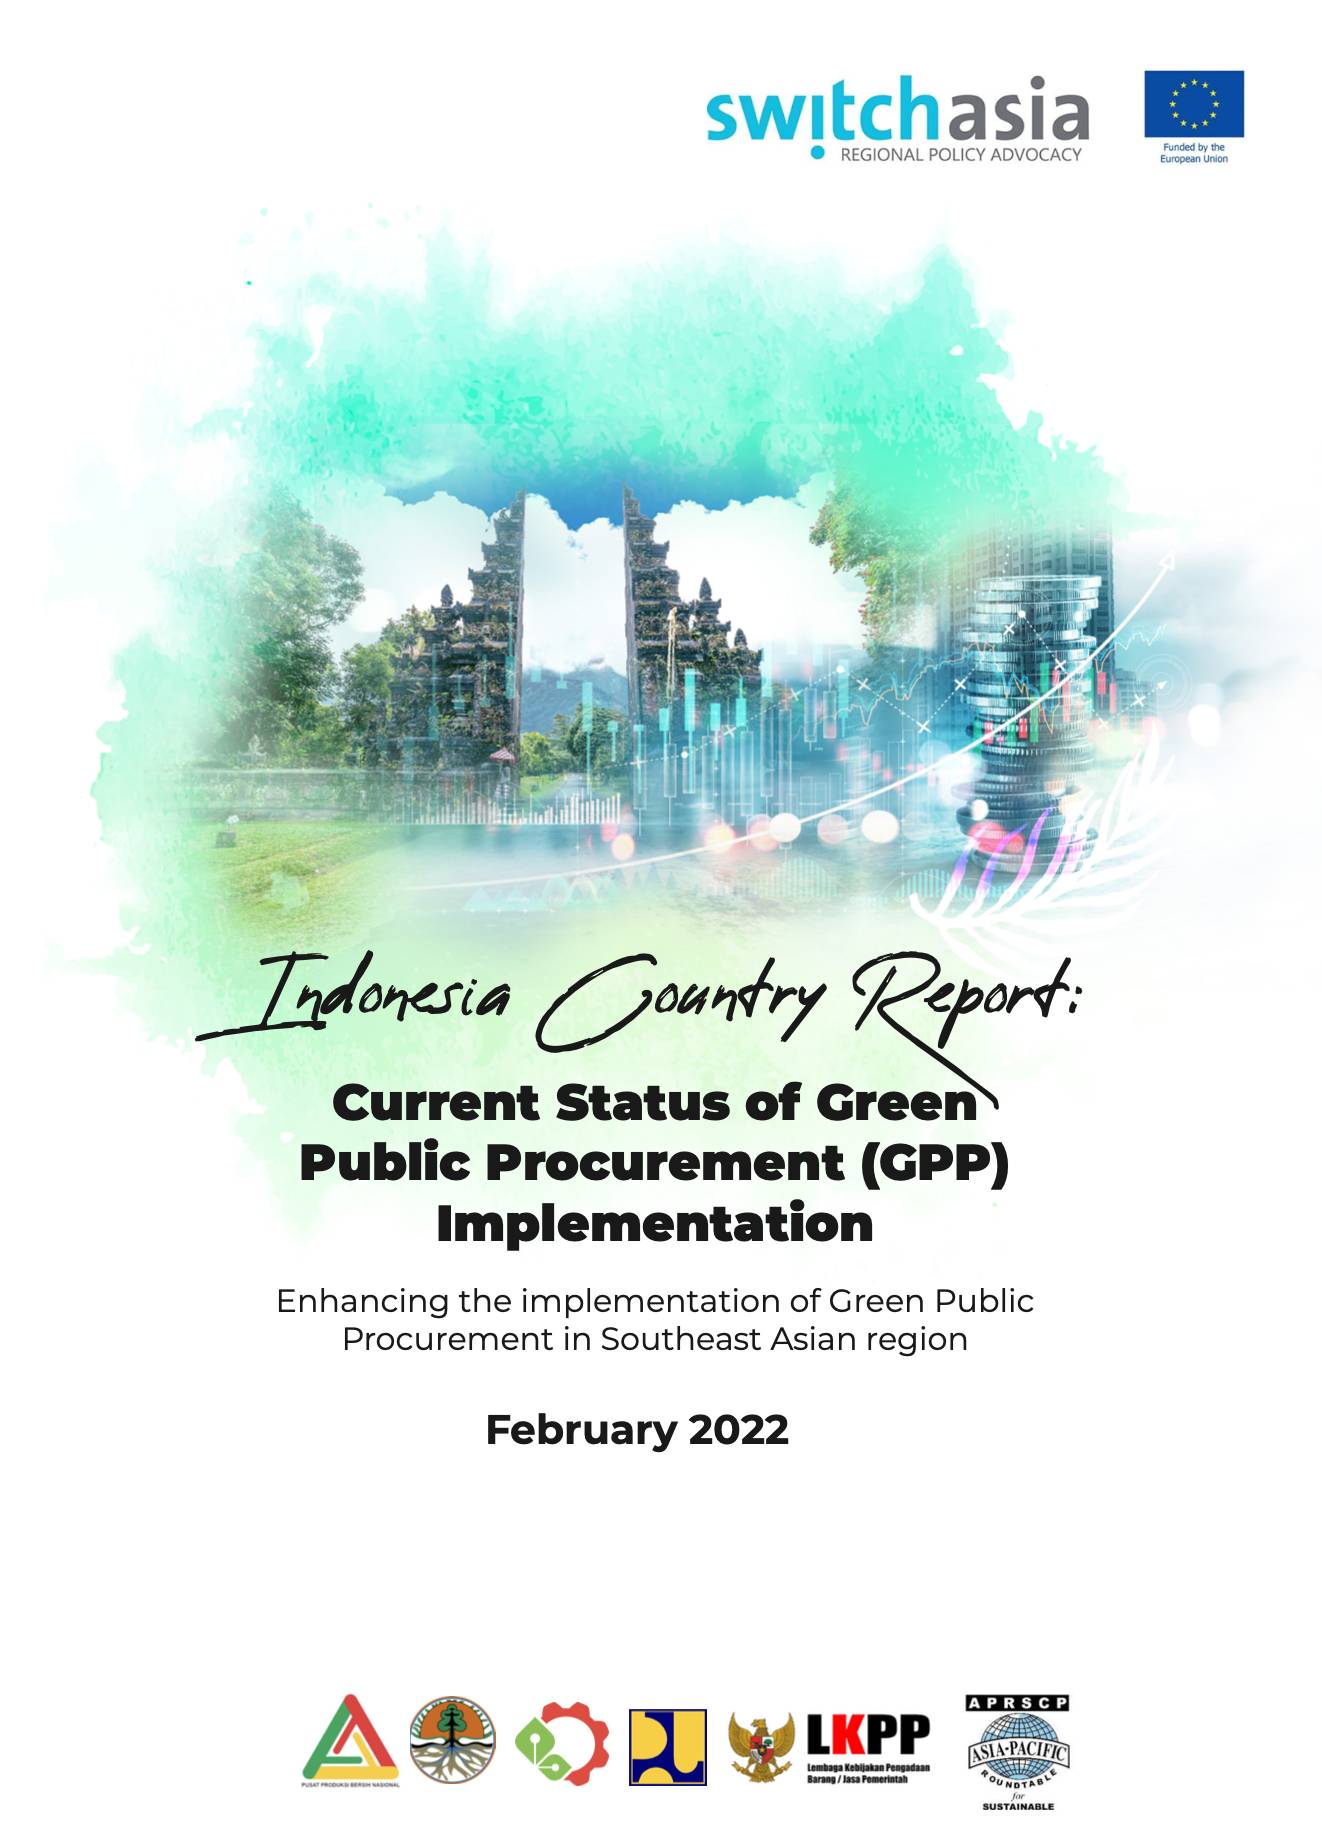 Indonesia Country Report: Current Status of Green Public Procurement Implementation3400